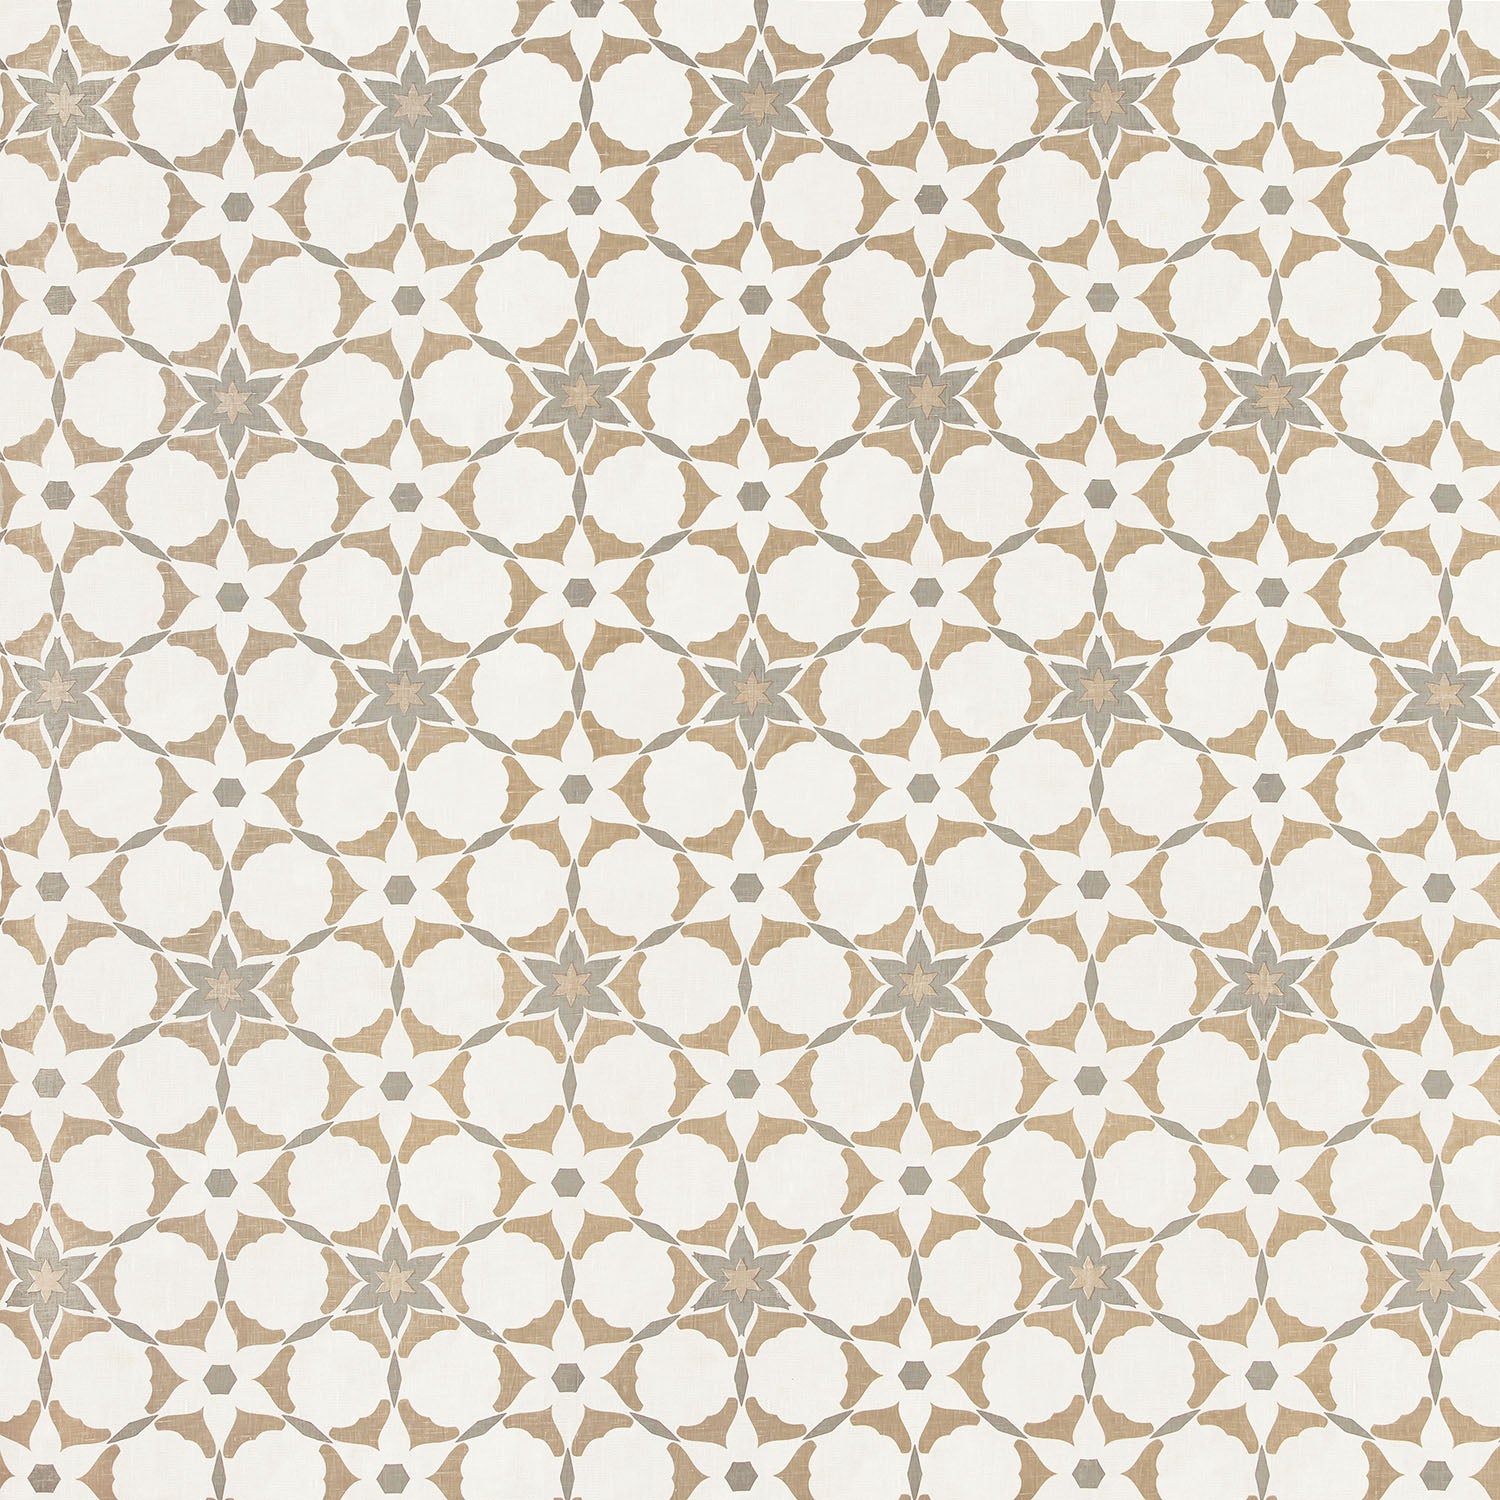 Fabric in a geometric star print in shades of brown and tan on a white field.